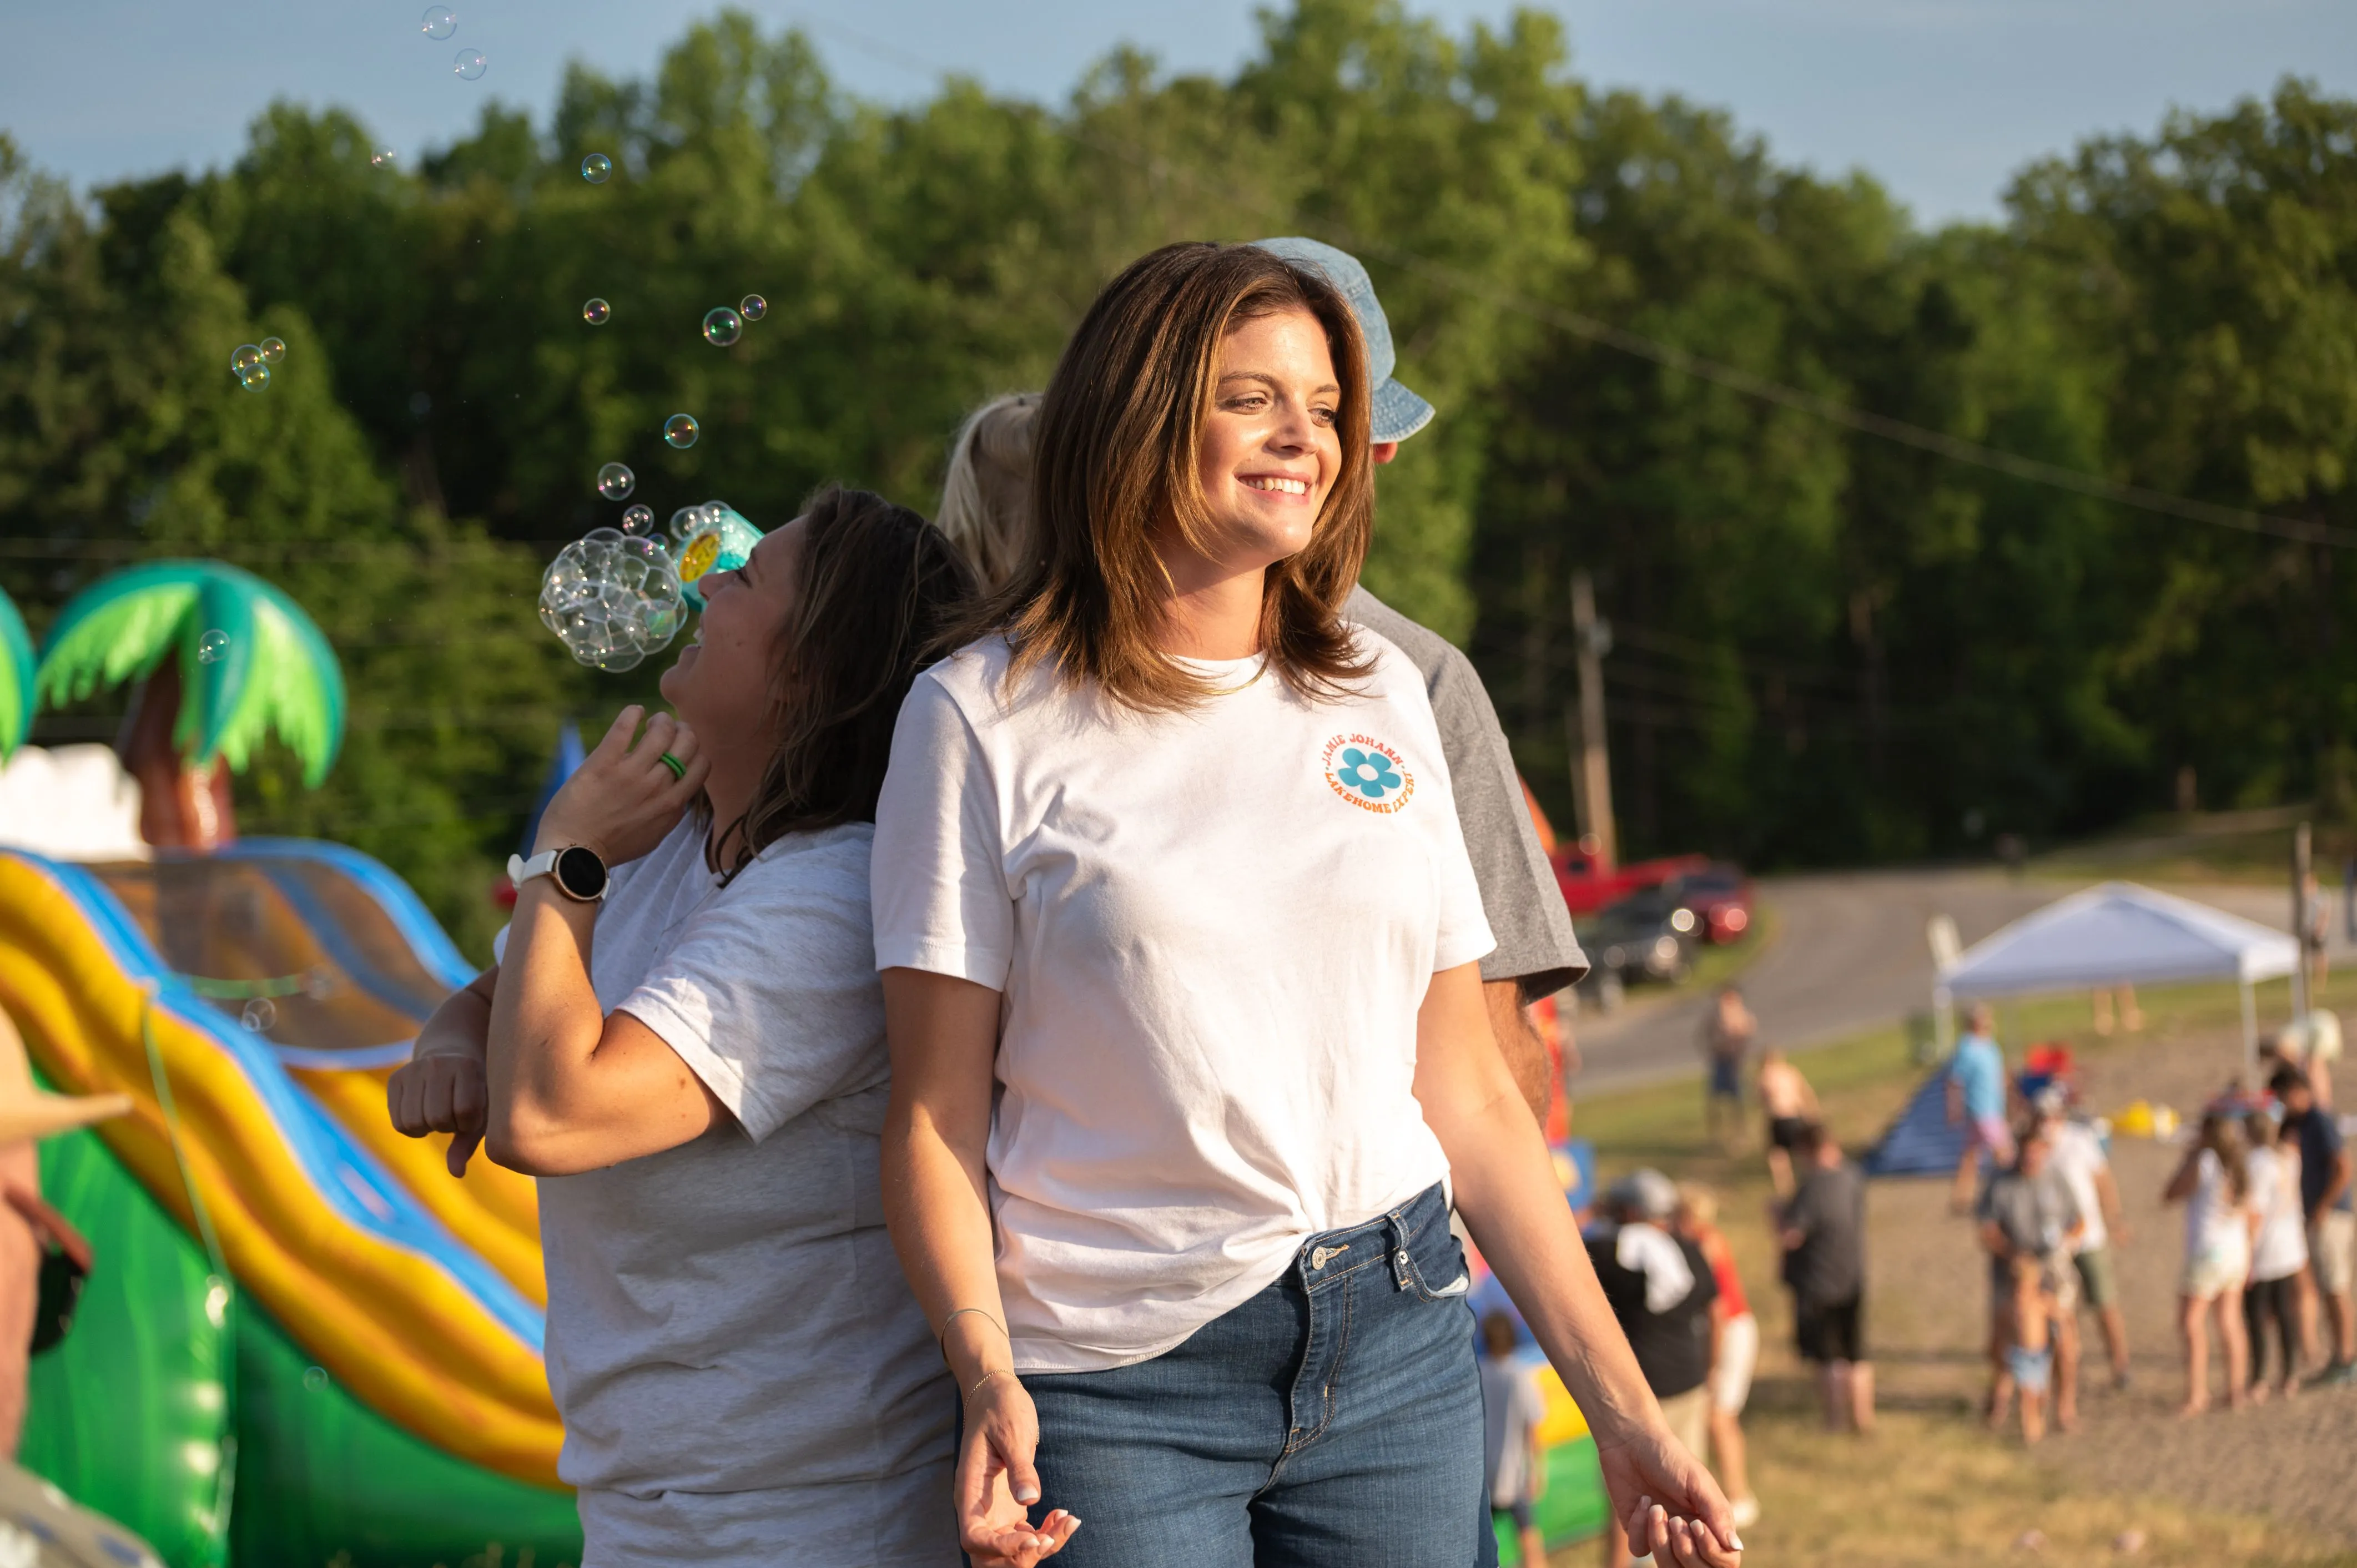 Woman smiling and walking at an outdoor event with people and an inflatable slide in the background.